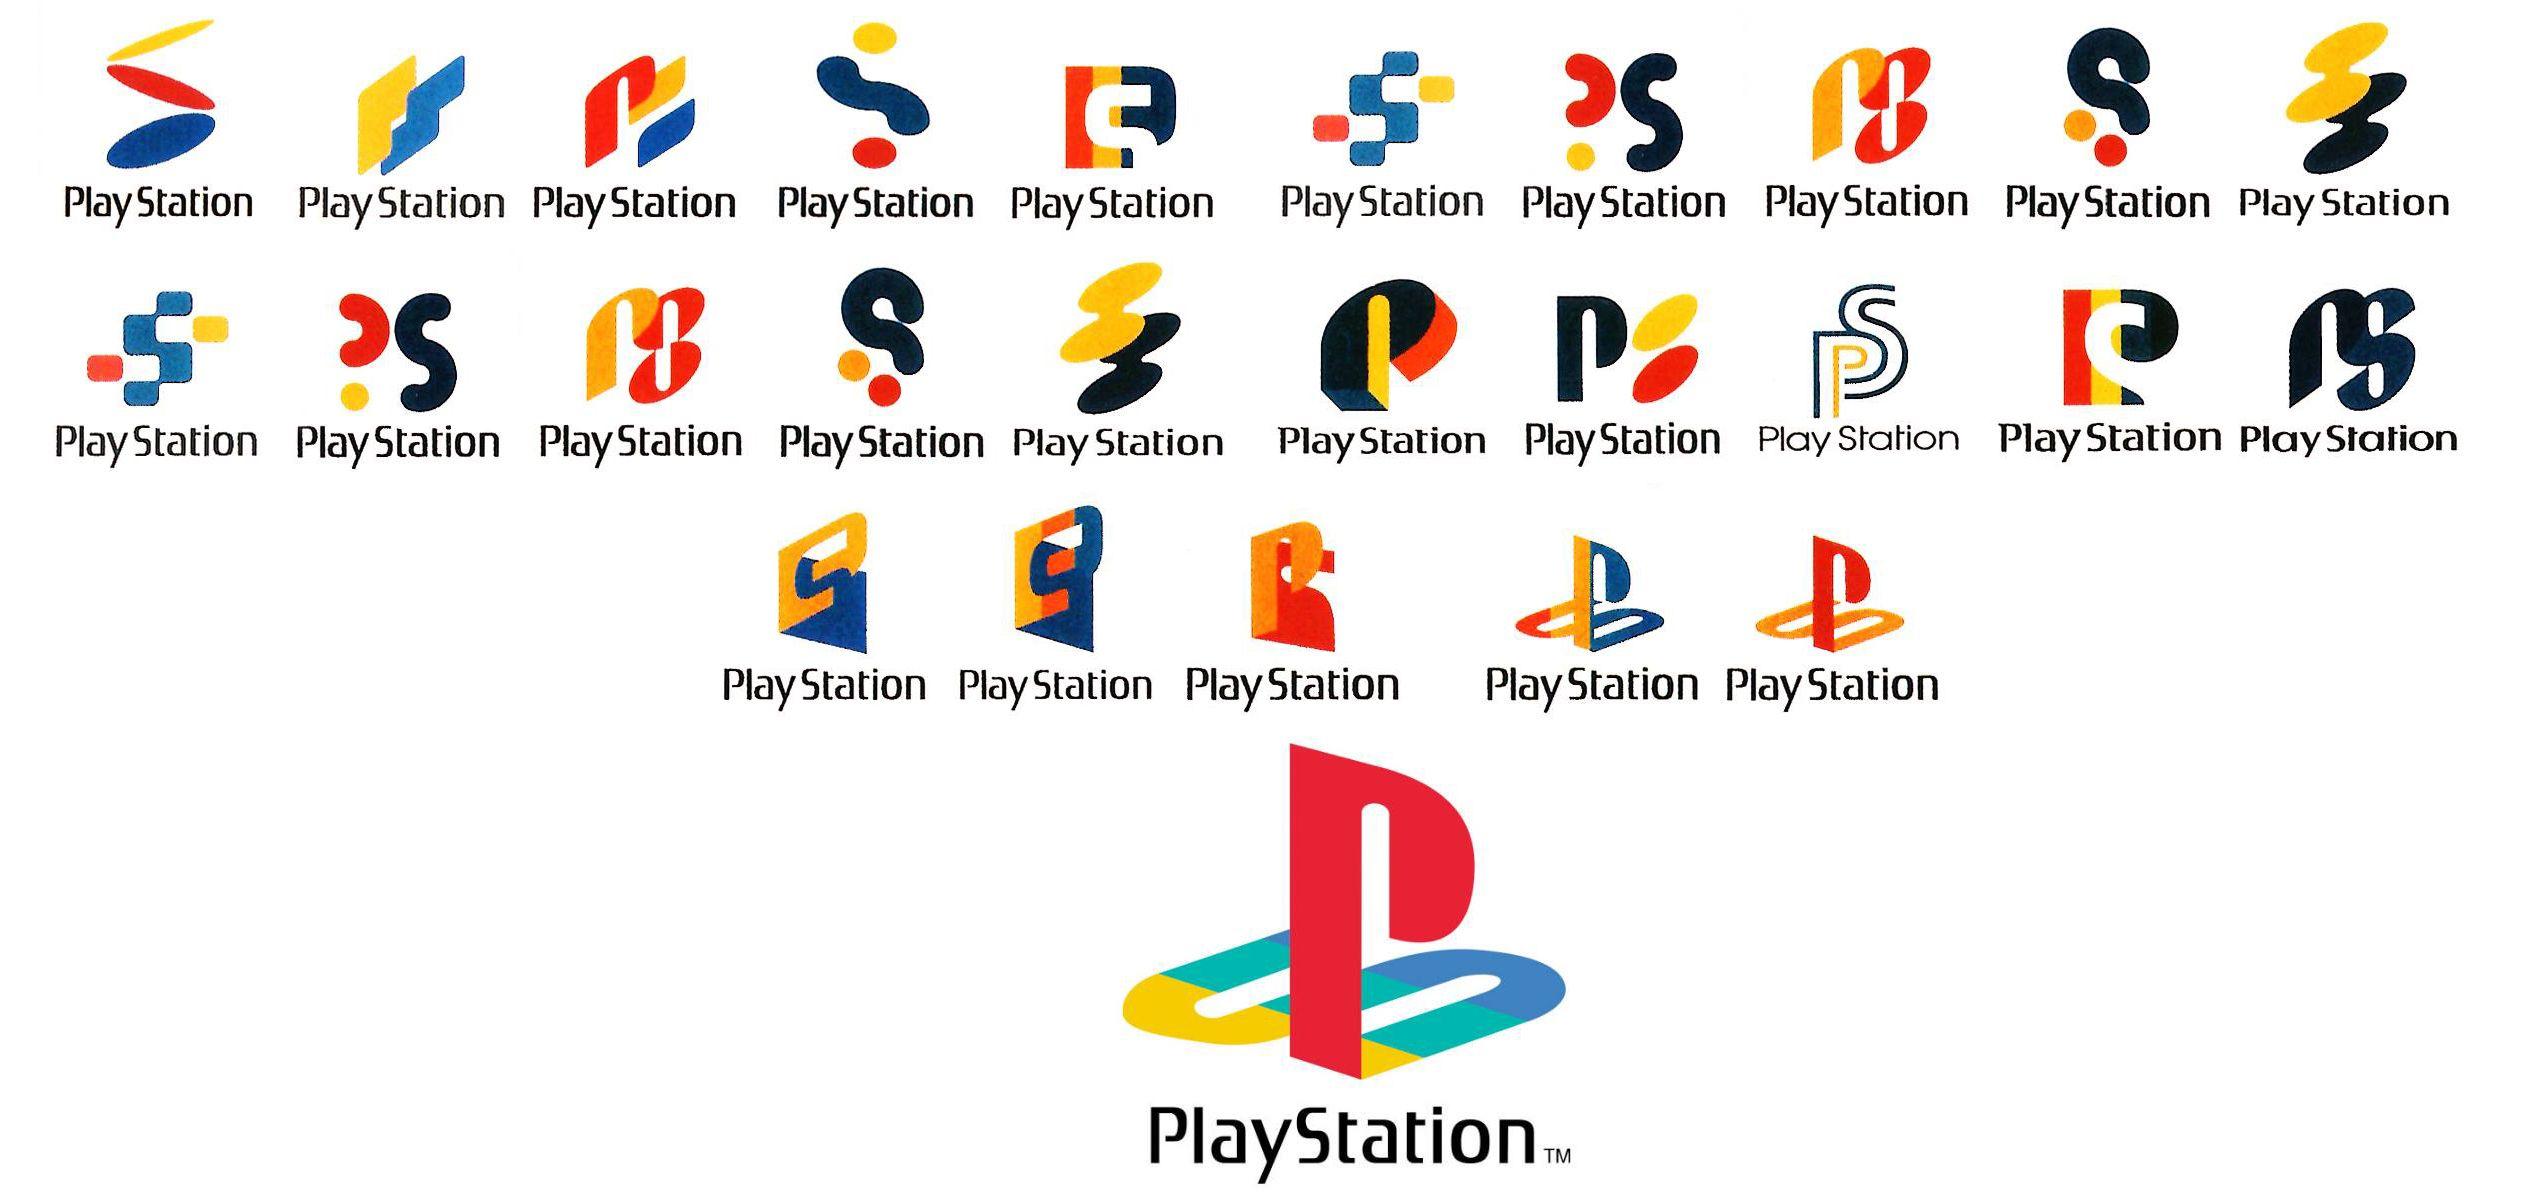 Playstatino Logo - PlayStation Logo, PlayStation Symbol, History and Evolution